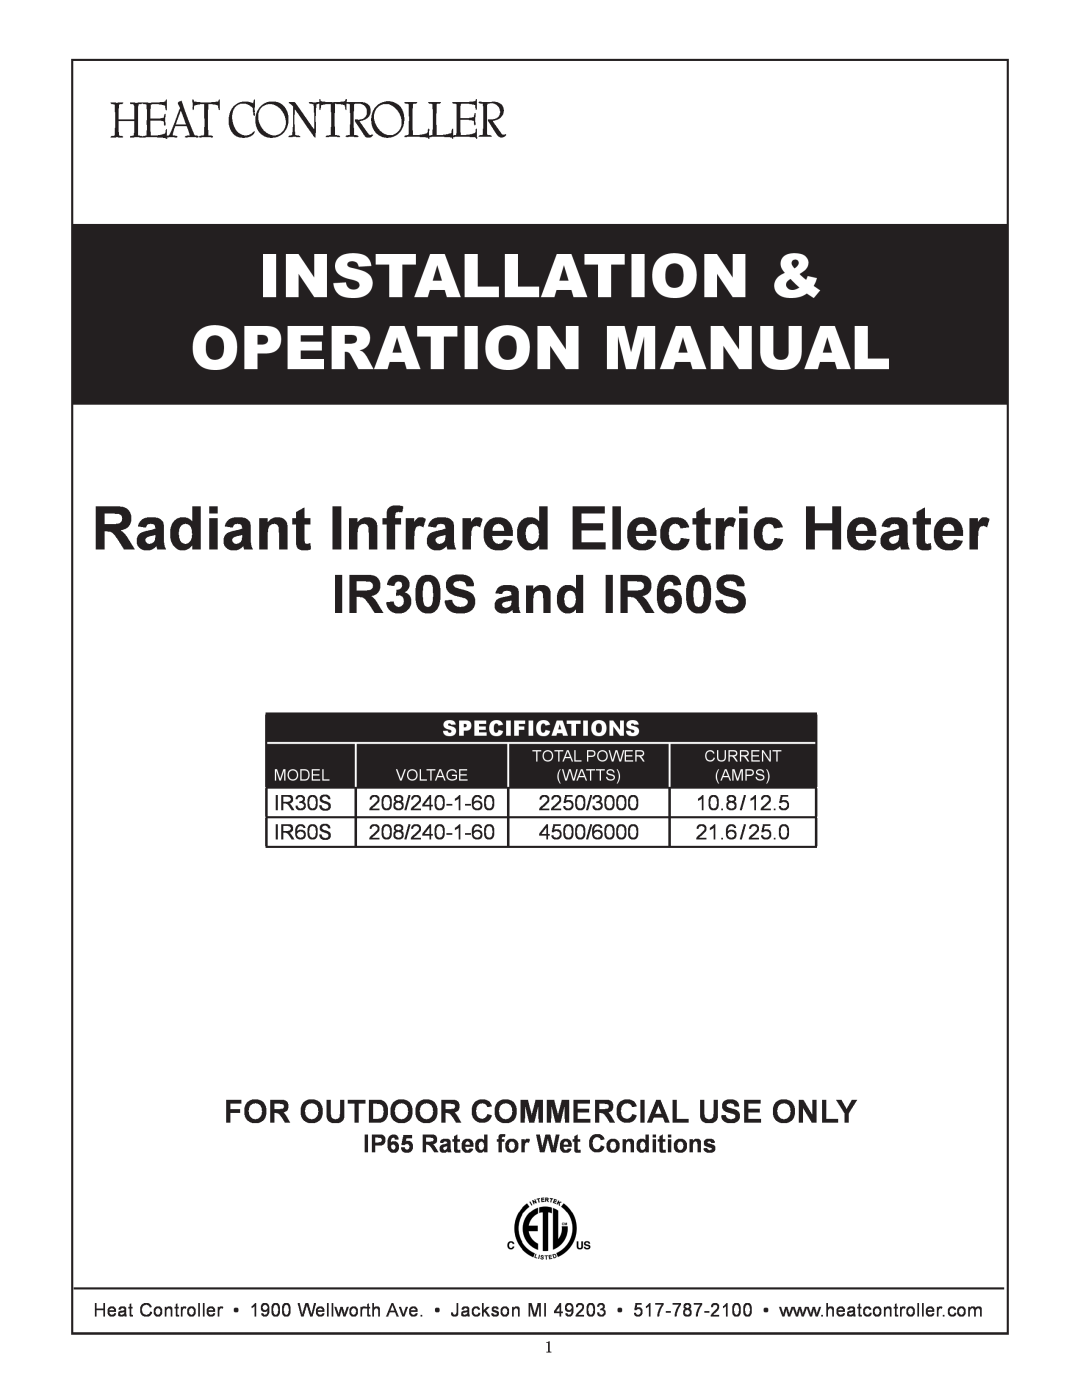 Heat Controller IR60S operation manual IR30S, 208/240-1-60, 2250/3000, 10.8 / 12.5, 4500/6000, 21.6 / 25.0, Specifications 